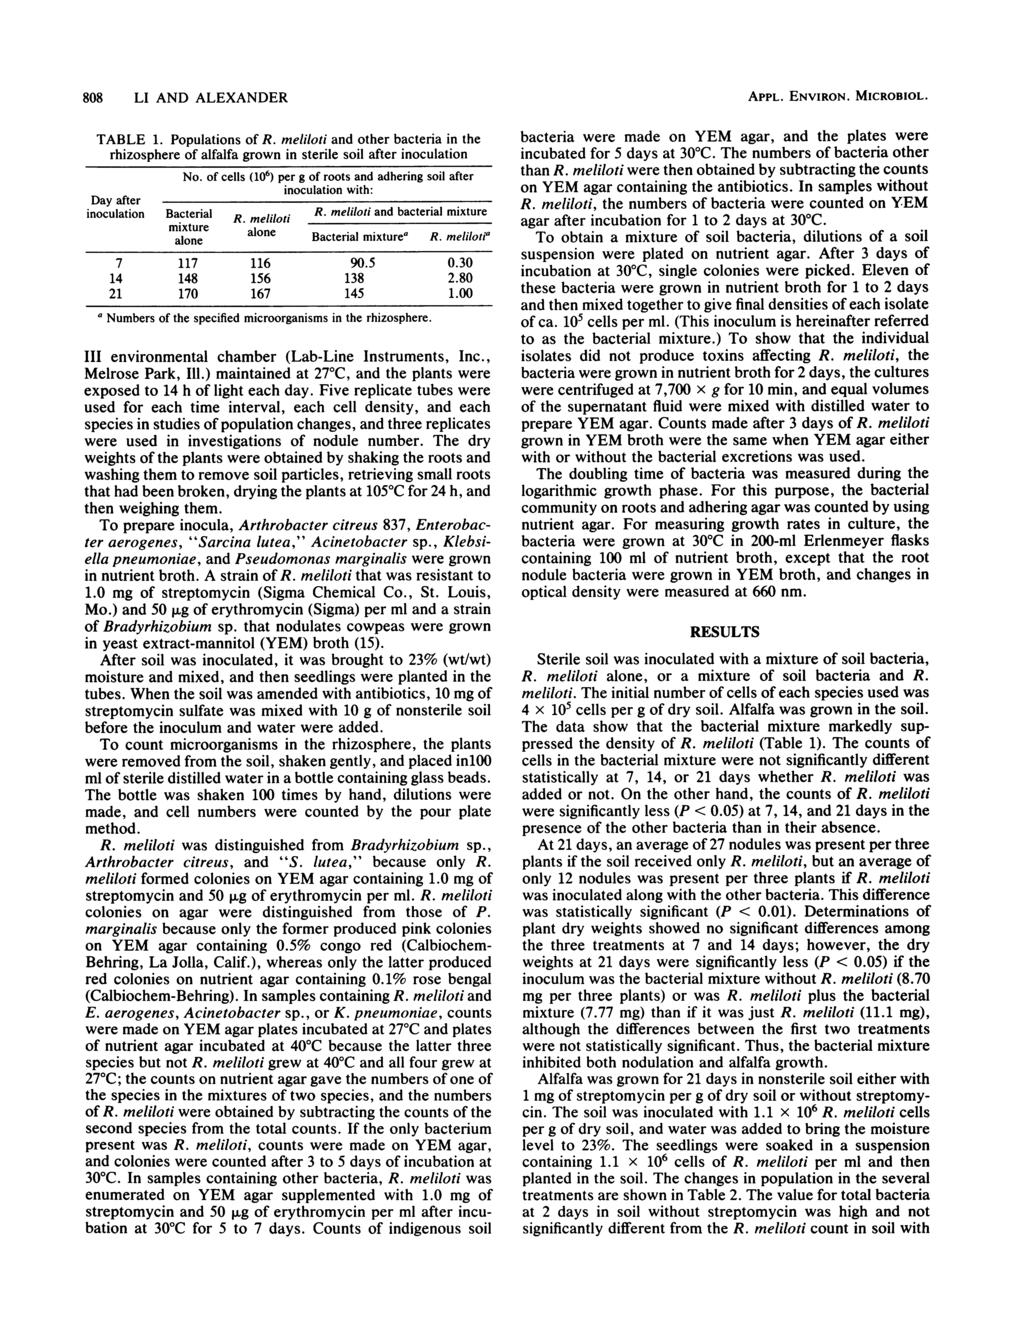 808 LI AND ALEXANDER TABLE 1. Populations of R. meliloti and other bacteria in the rhizosphere of alfalfa grown in sterile soil after inoculation No.